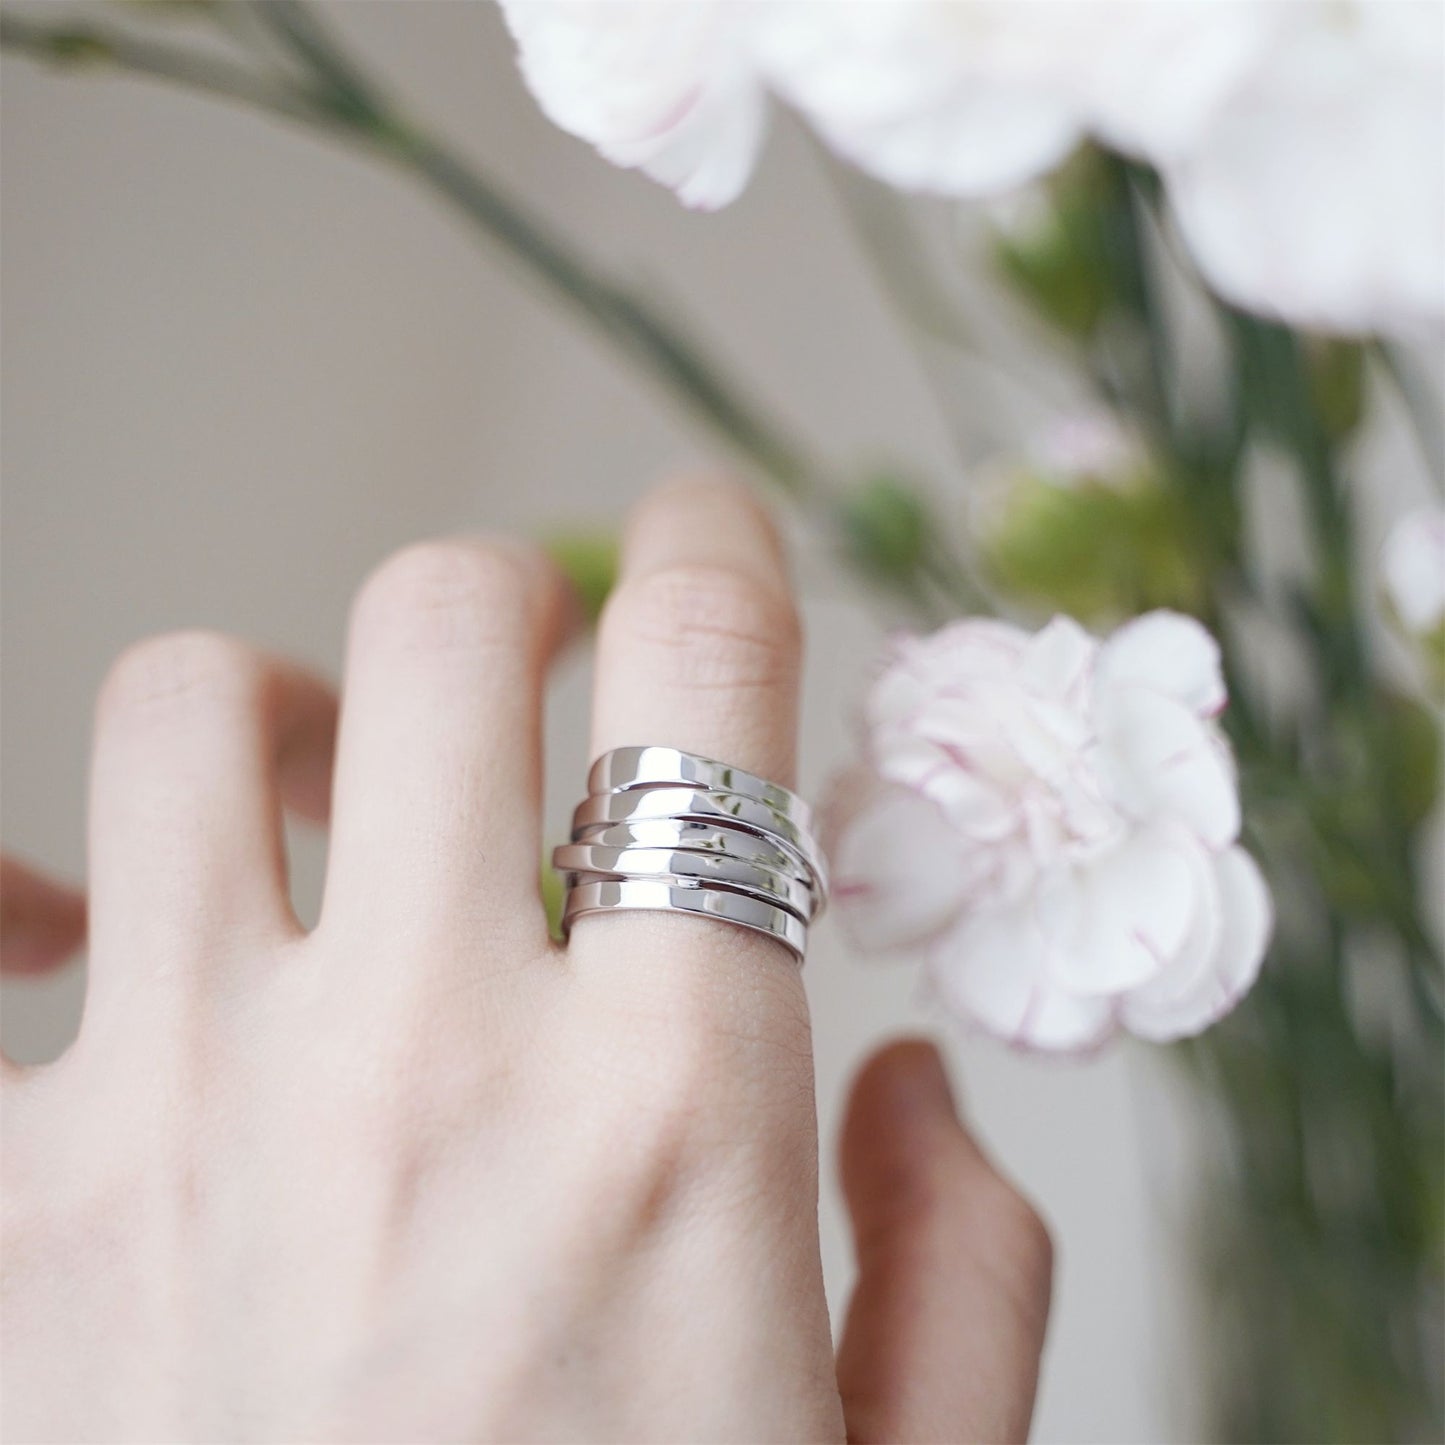 925 Sterling Silver Crossover Ring with Multi Band and Shiny Finish - sugarkittenlondon